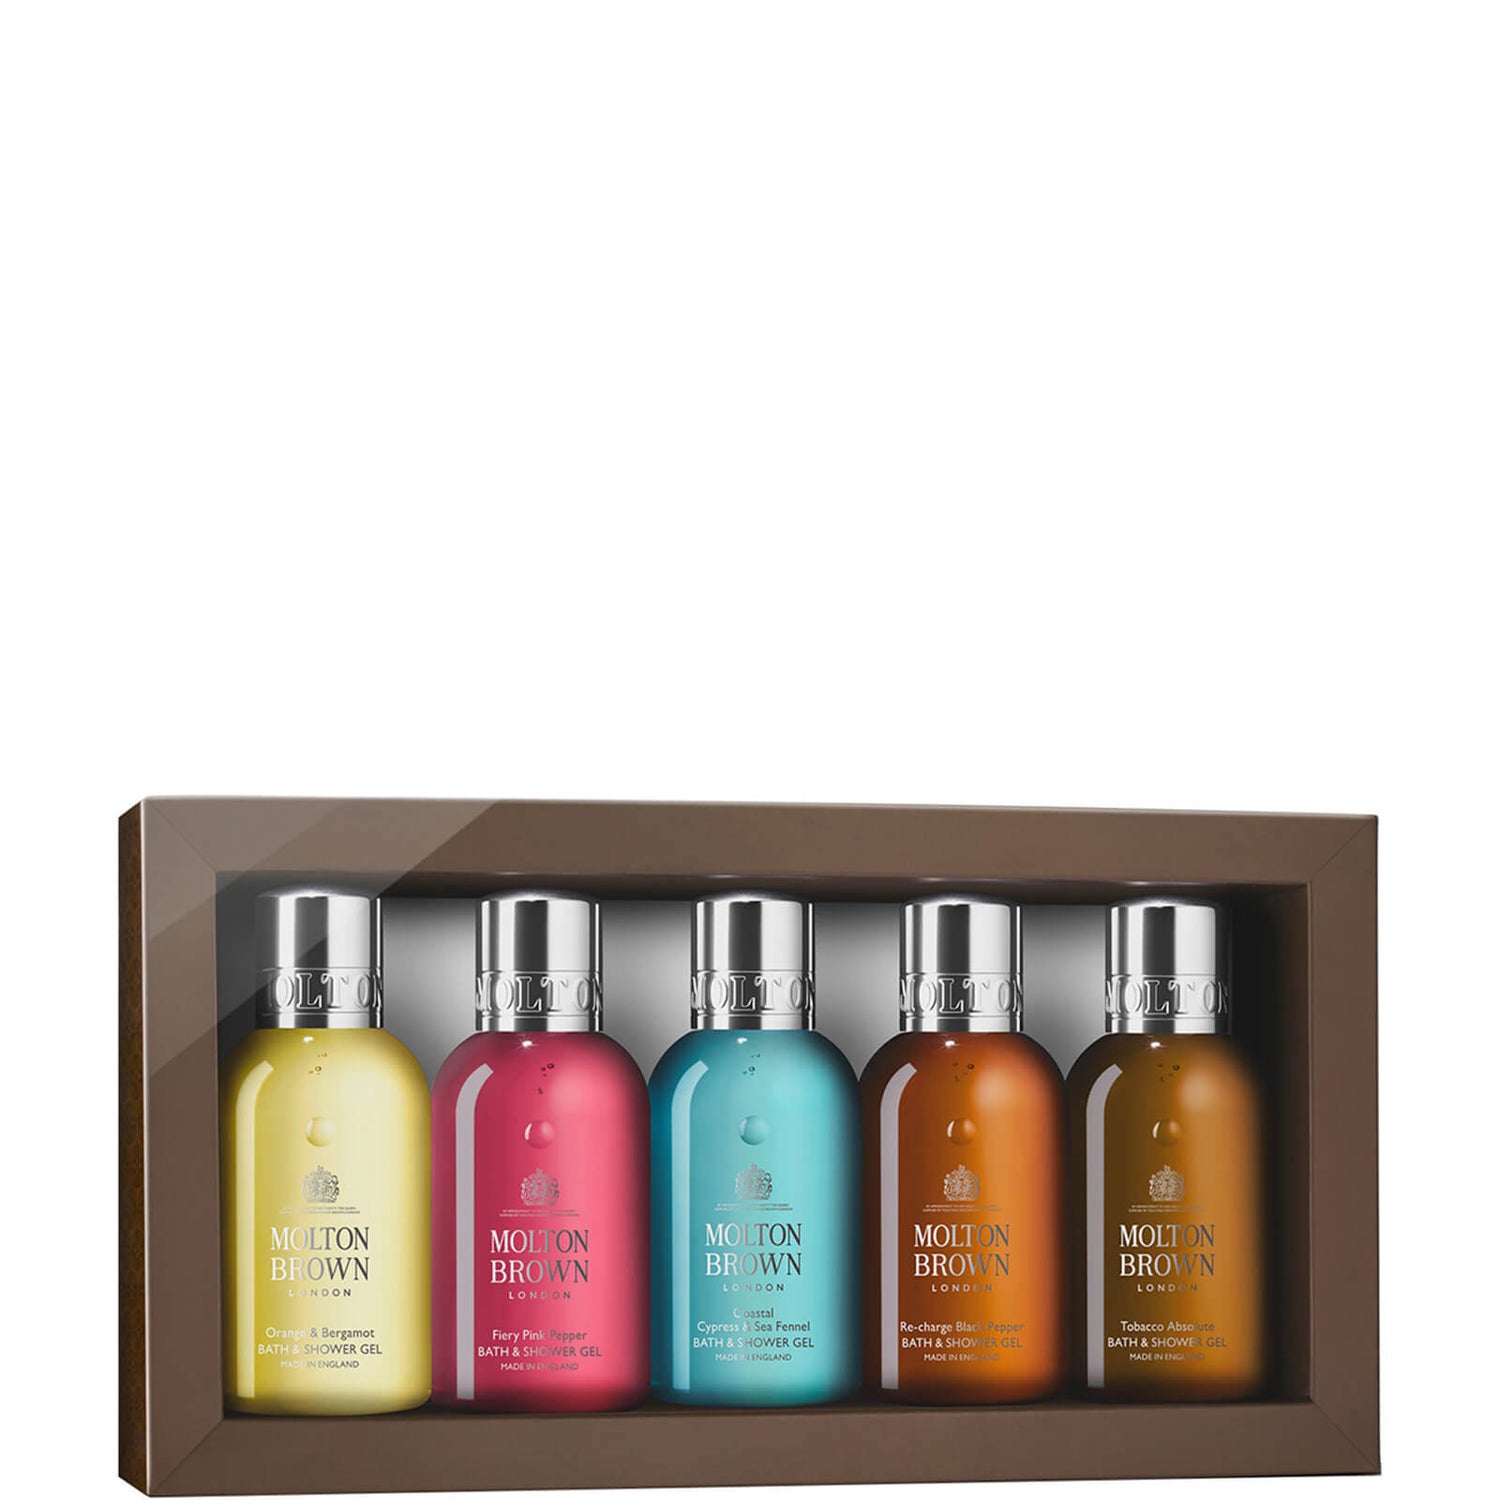 MOLTON BROWN The Icons Travel Collection